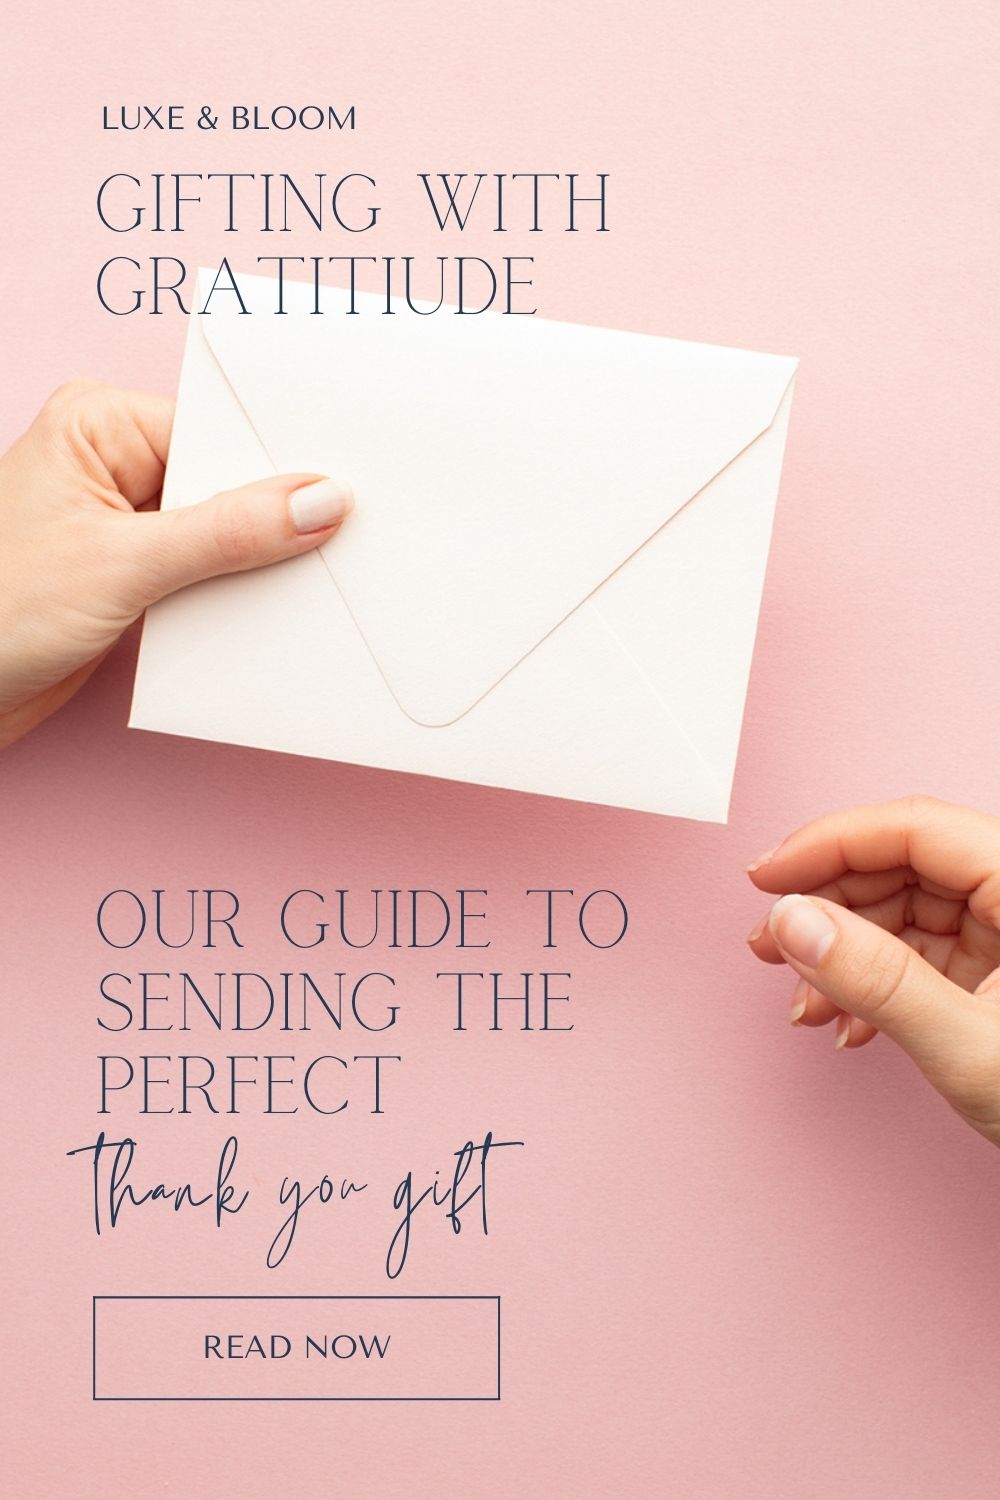 Our Guide To Sending The Perfect Thank You Gift! Luxe & Bloom Client And Thank You Gift Boxes.